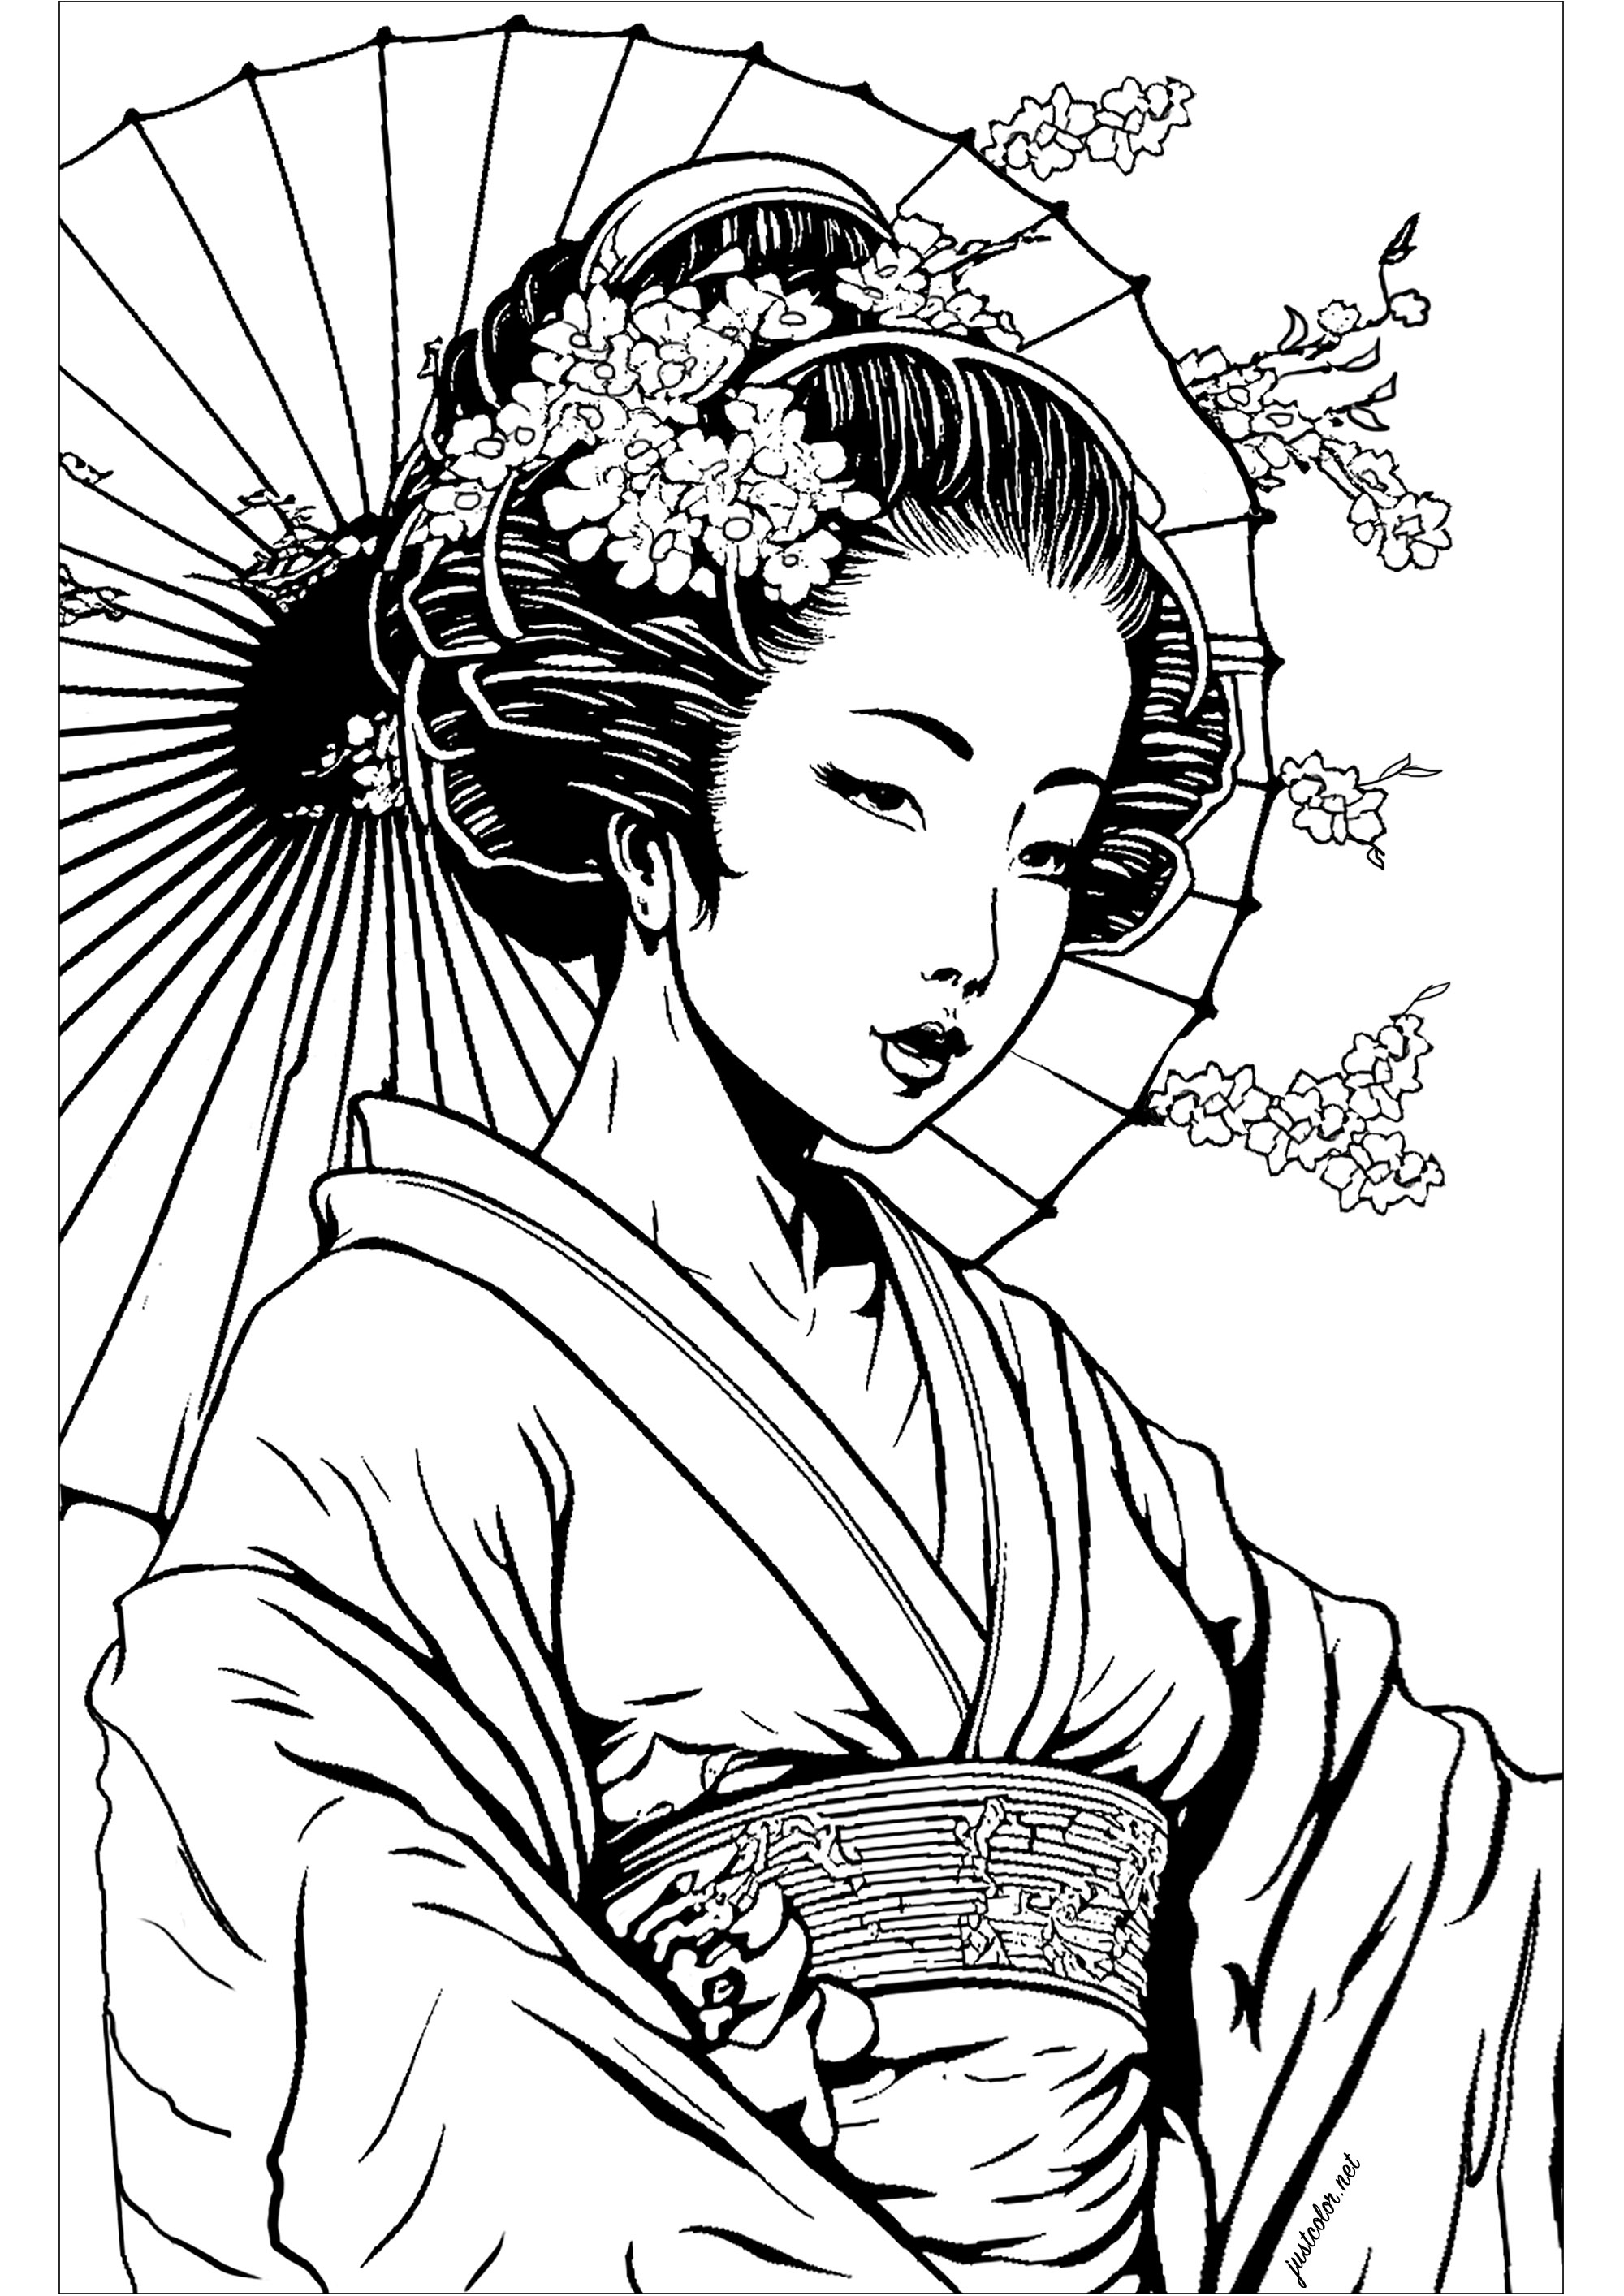 Beautiful Geisha to color. The Geisha is depicted in a classical pose, with a serene, benevolent expression. The composition is very simple, but very expressive, and will give you a feeling of calm and relaxation.